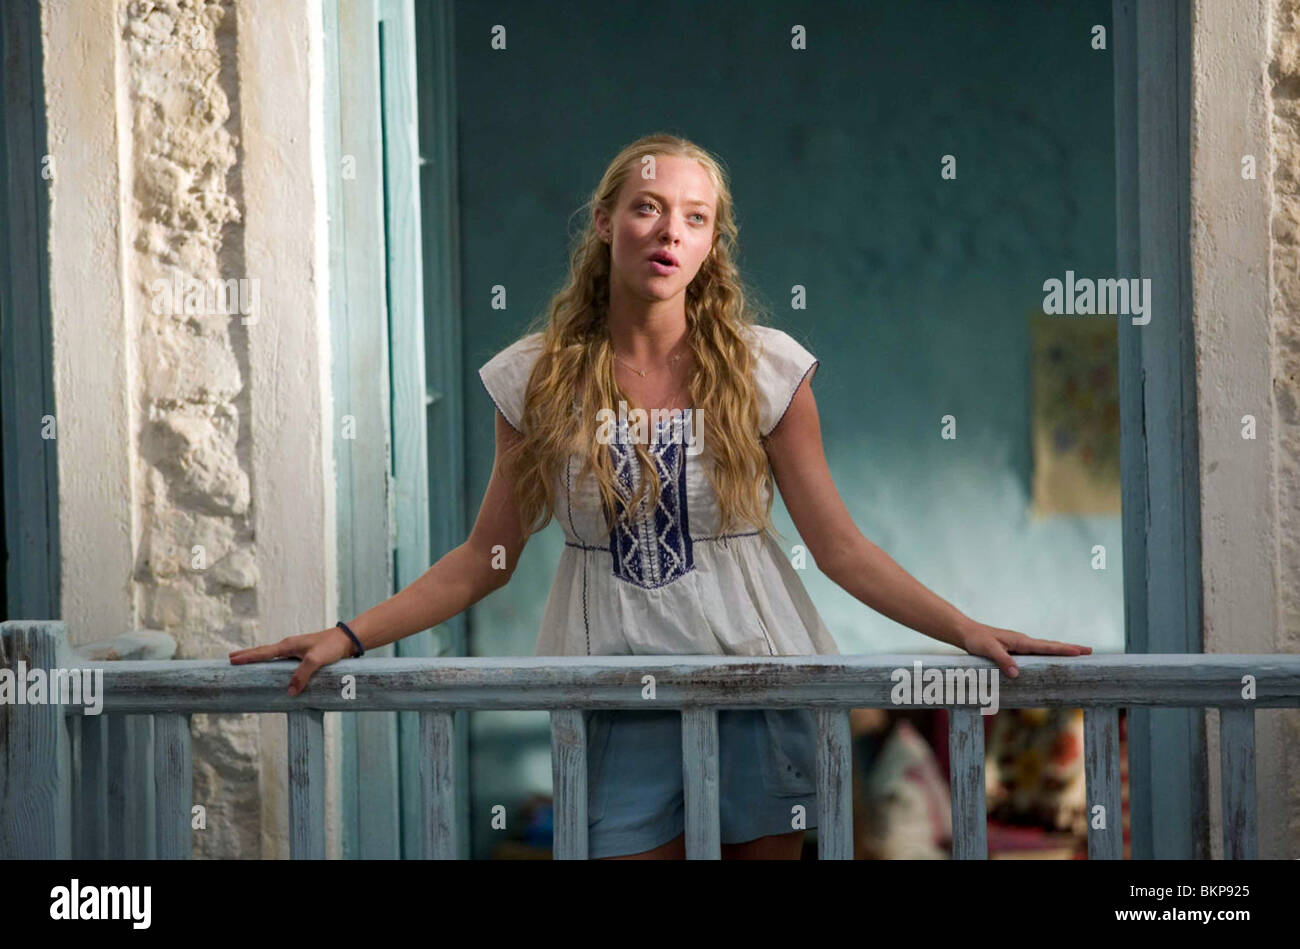 Mamma Mia Movie High Resolution Stock Photography and Images - Alamy